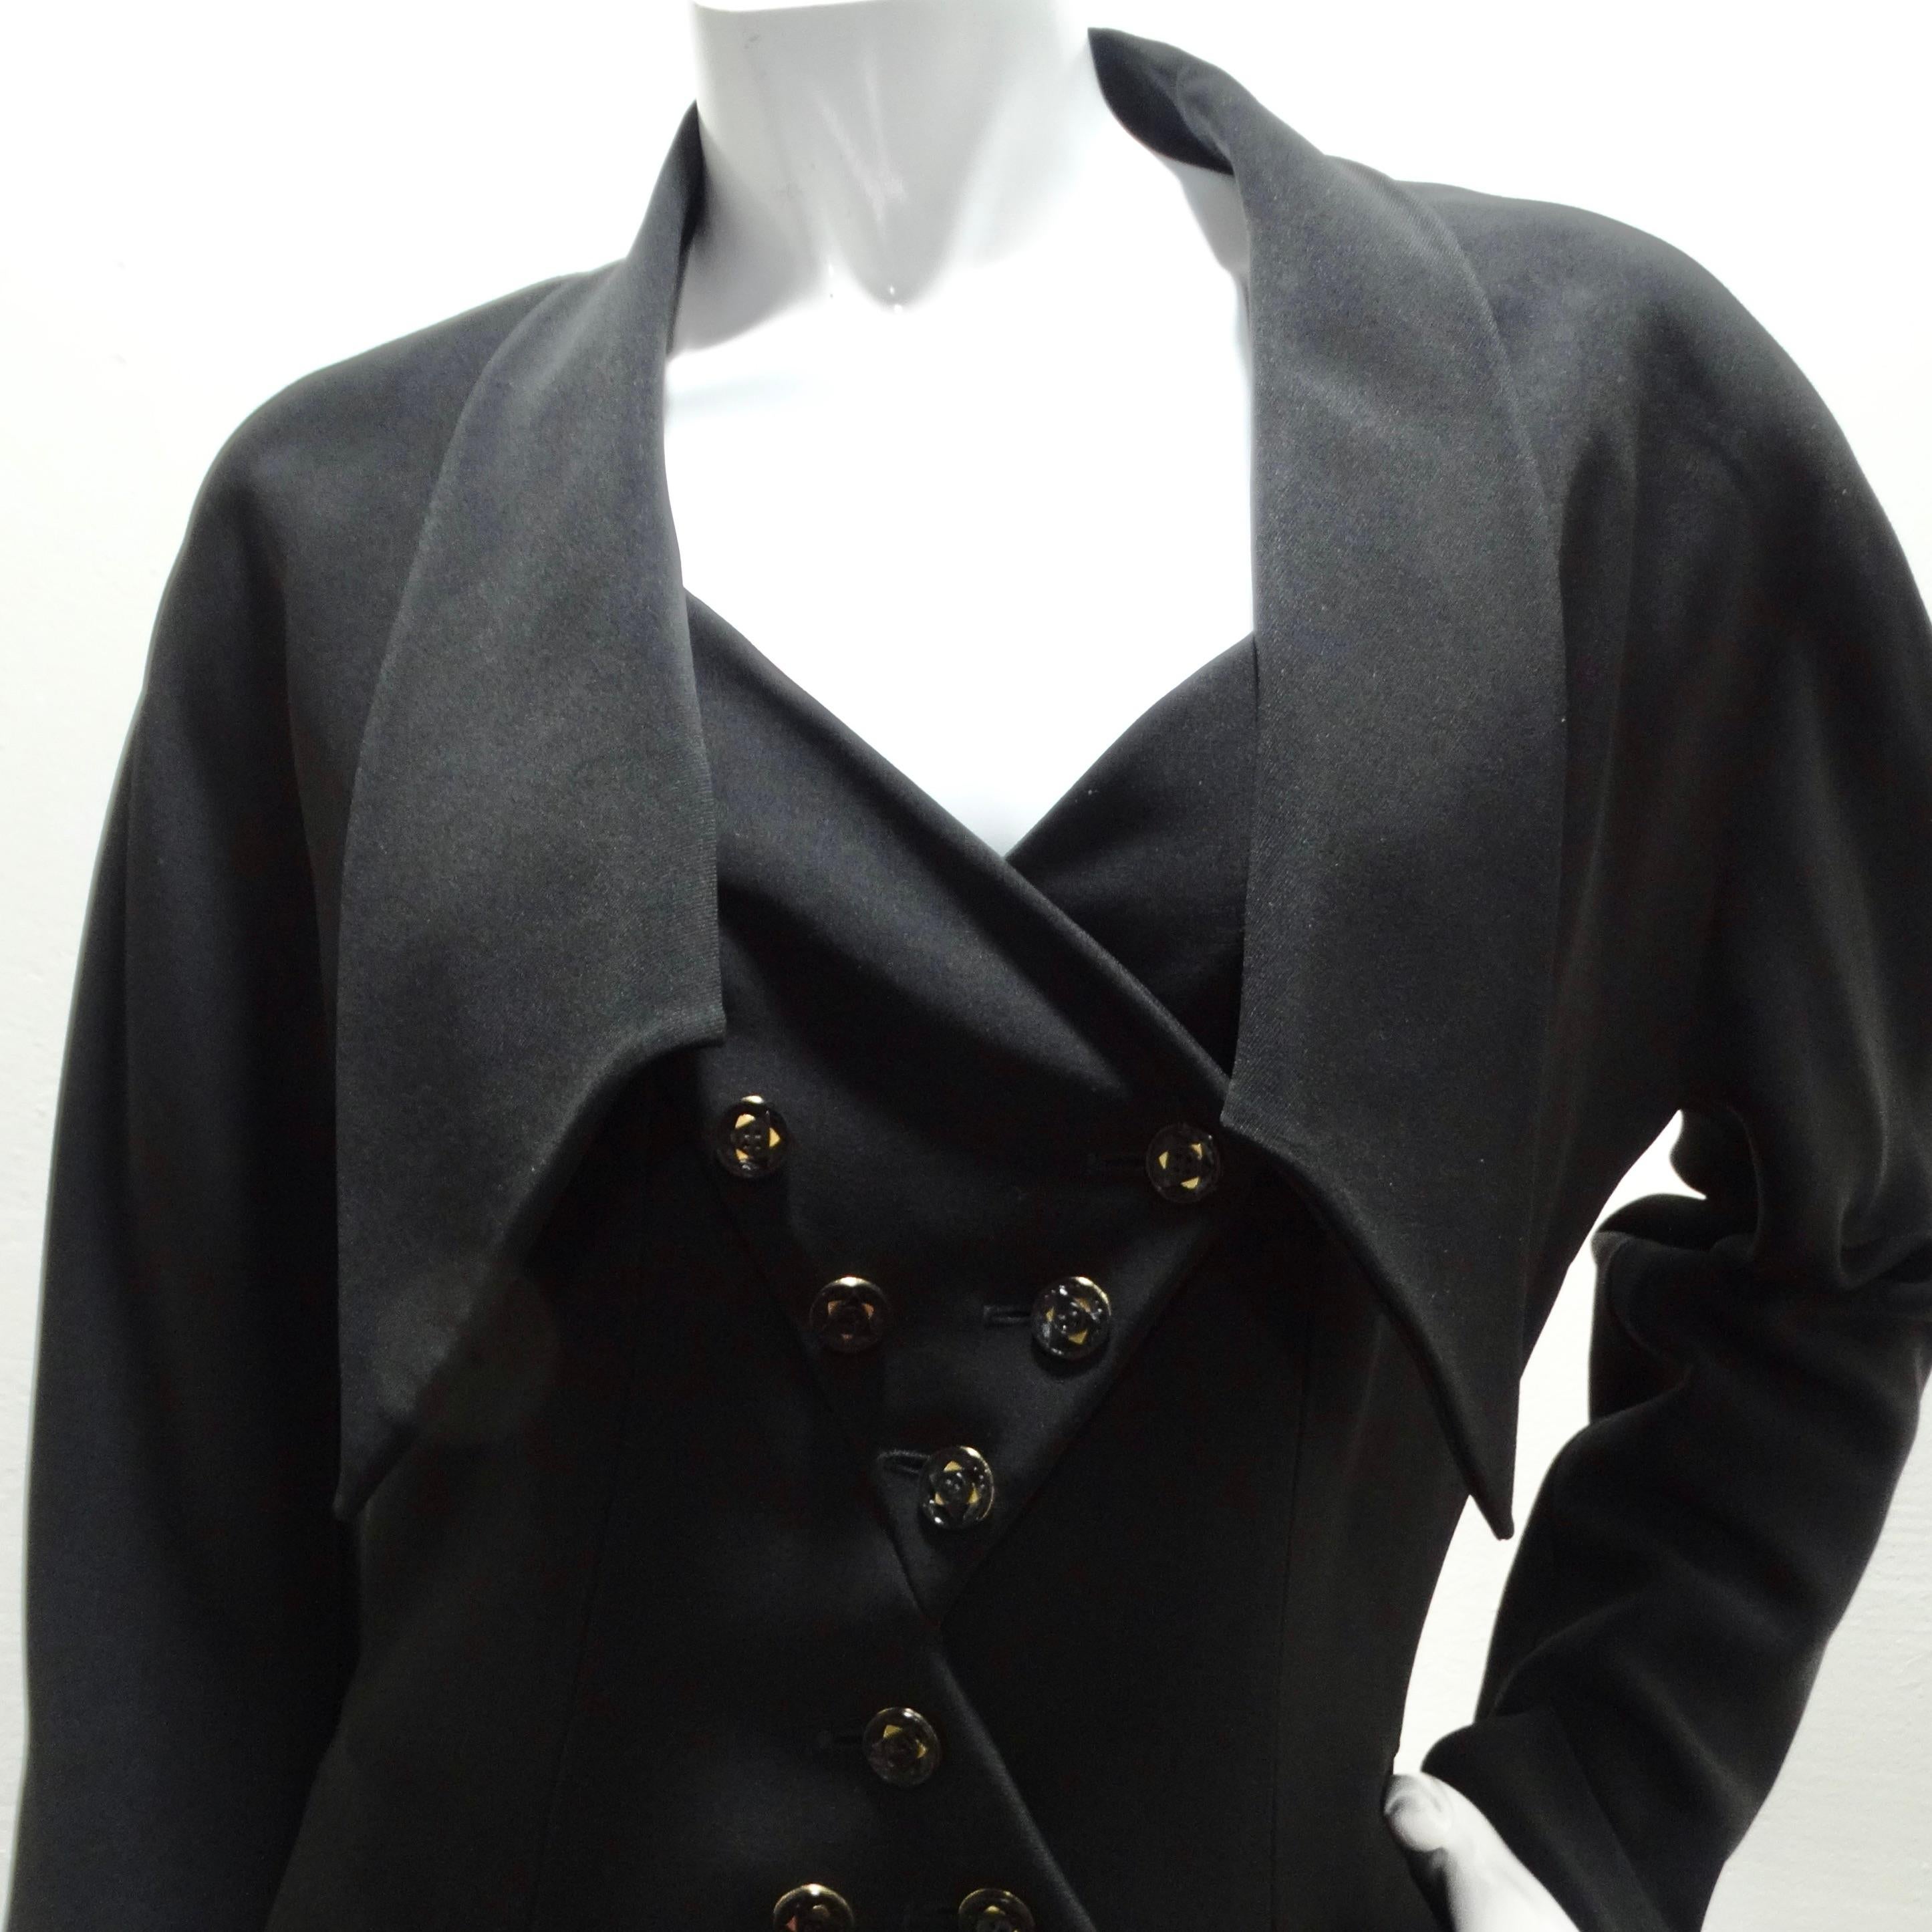 Karl Lagerfeld 1980s Asymmetric Black Skirt Suit In Excellent Condition For Sale In Scottsdale, AZ